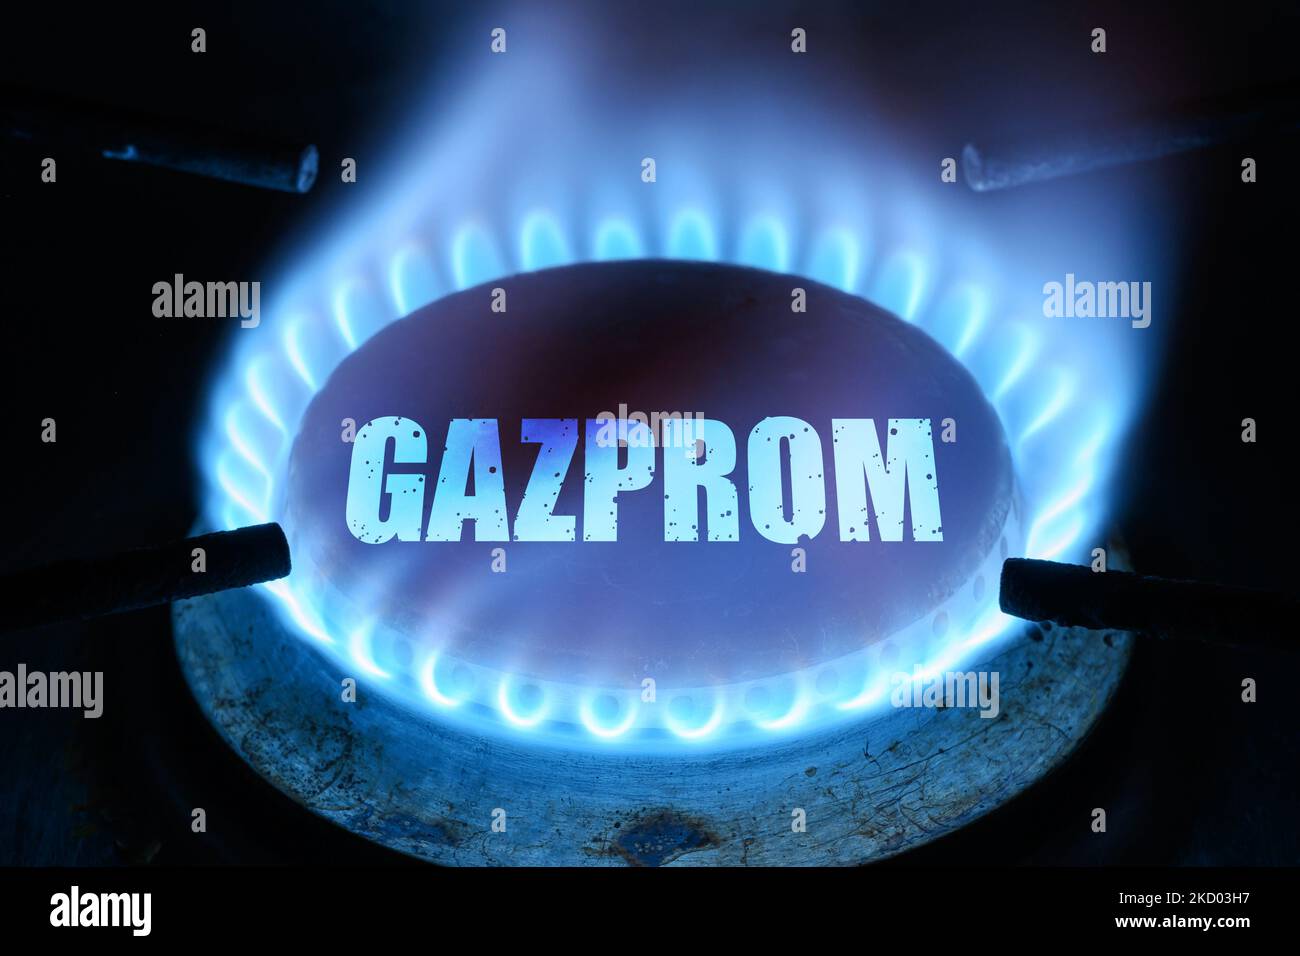 Gas burns in dark at home, blue fire flame and name Gazprom on stove ring burner. Concept of natural pipeline gas cost, warmth, energy crisis, economy Stock Photo